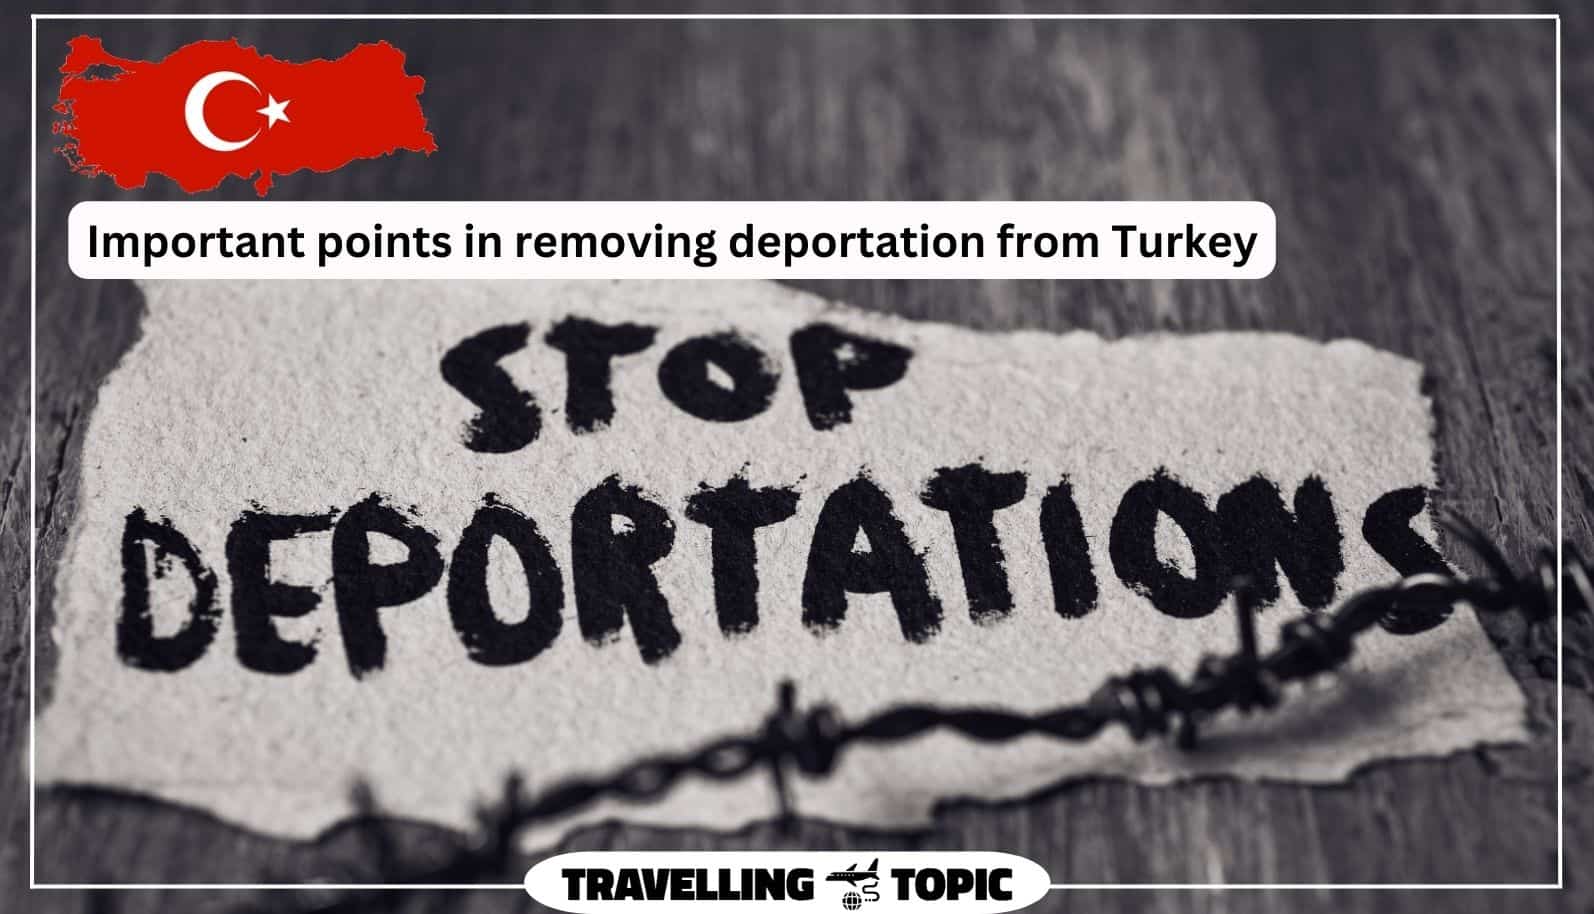 Important points in removing deportation from Turkey